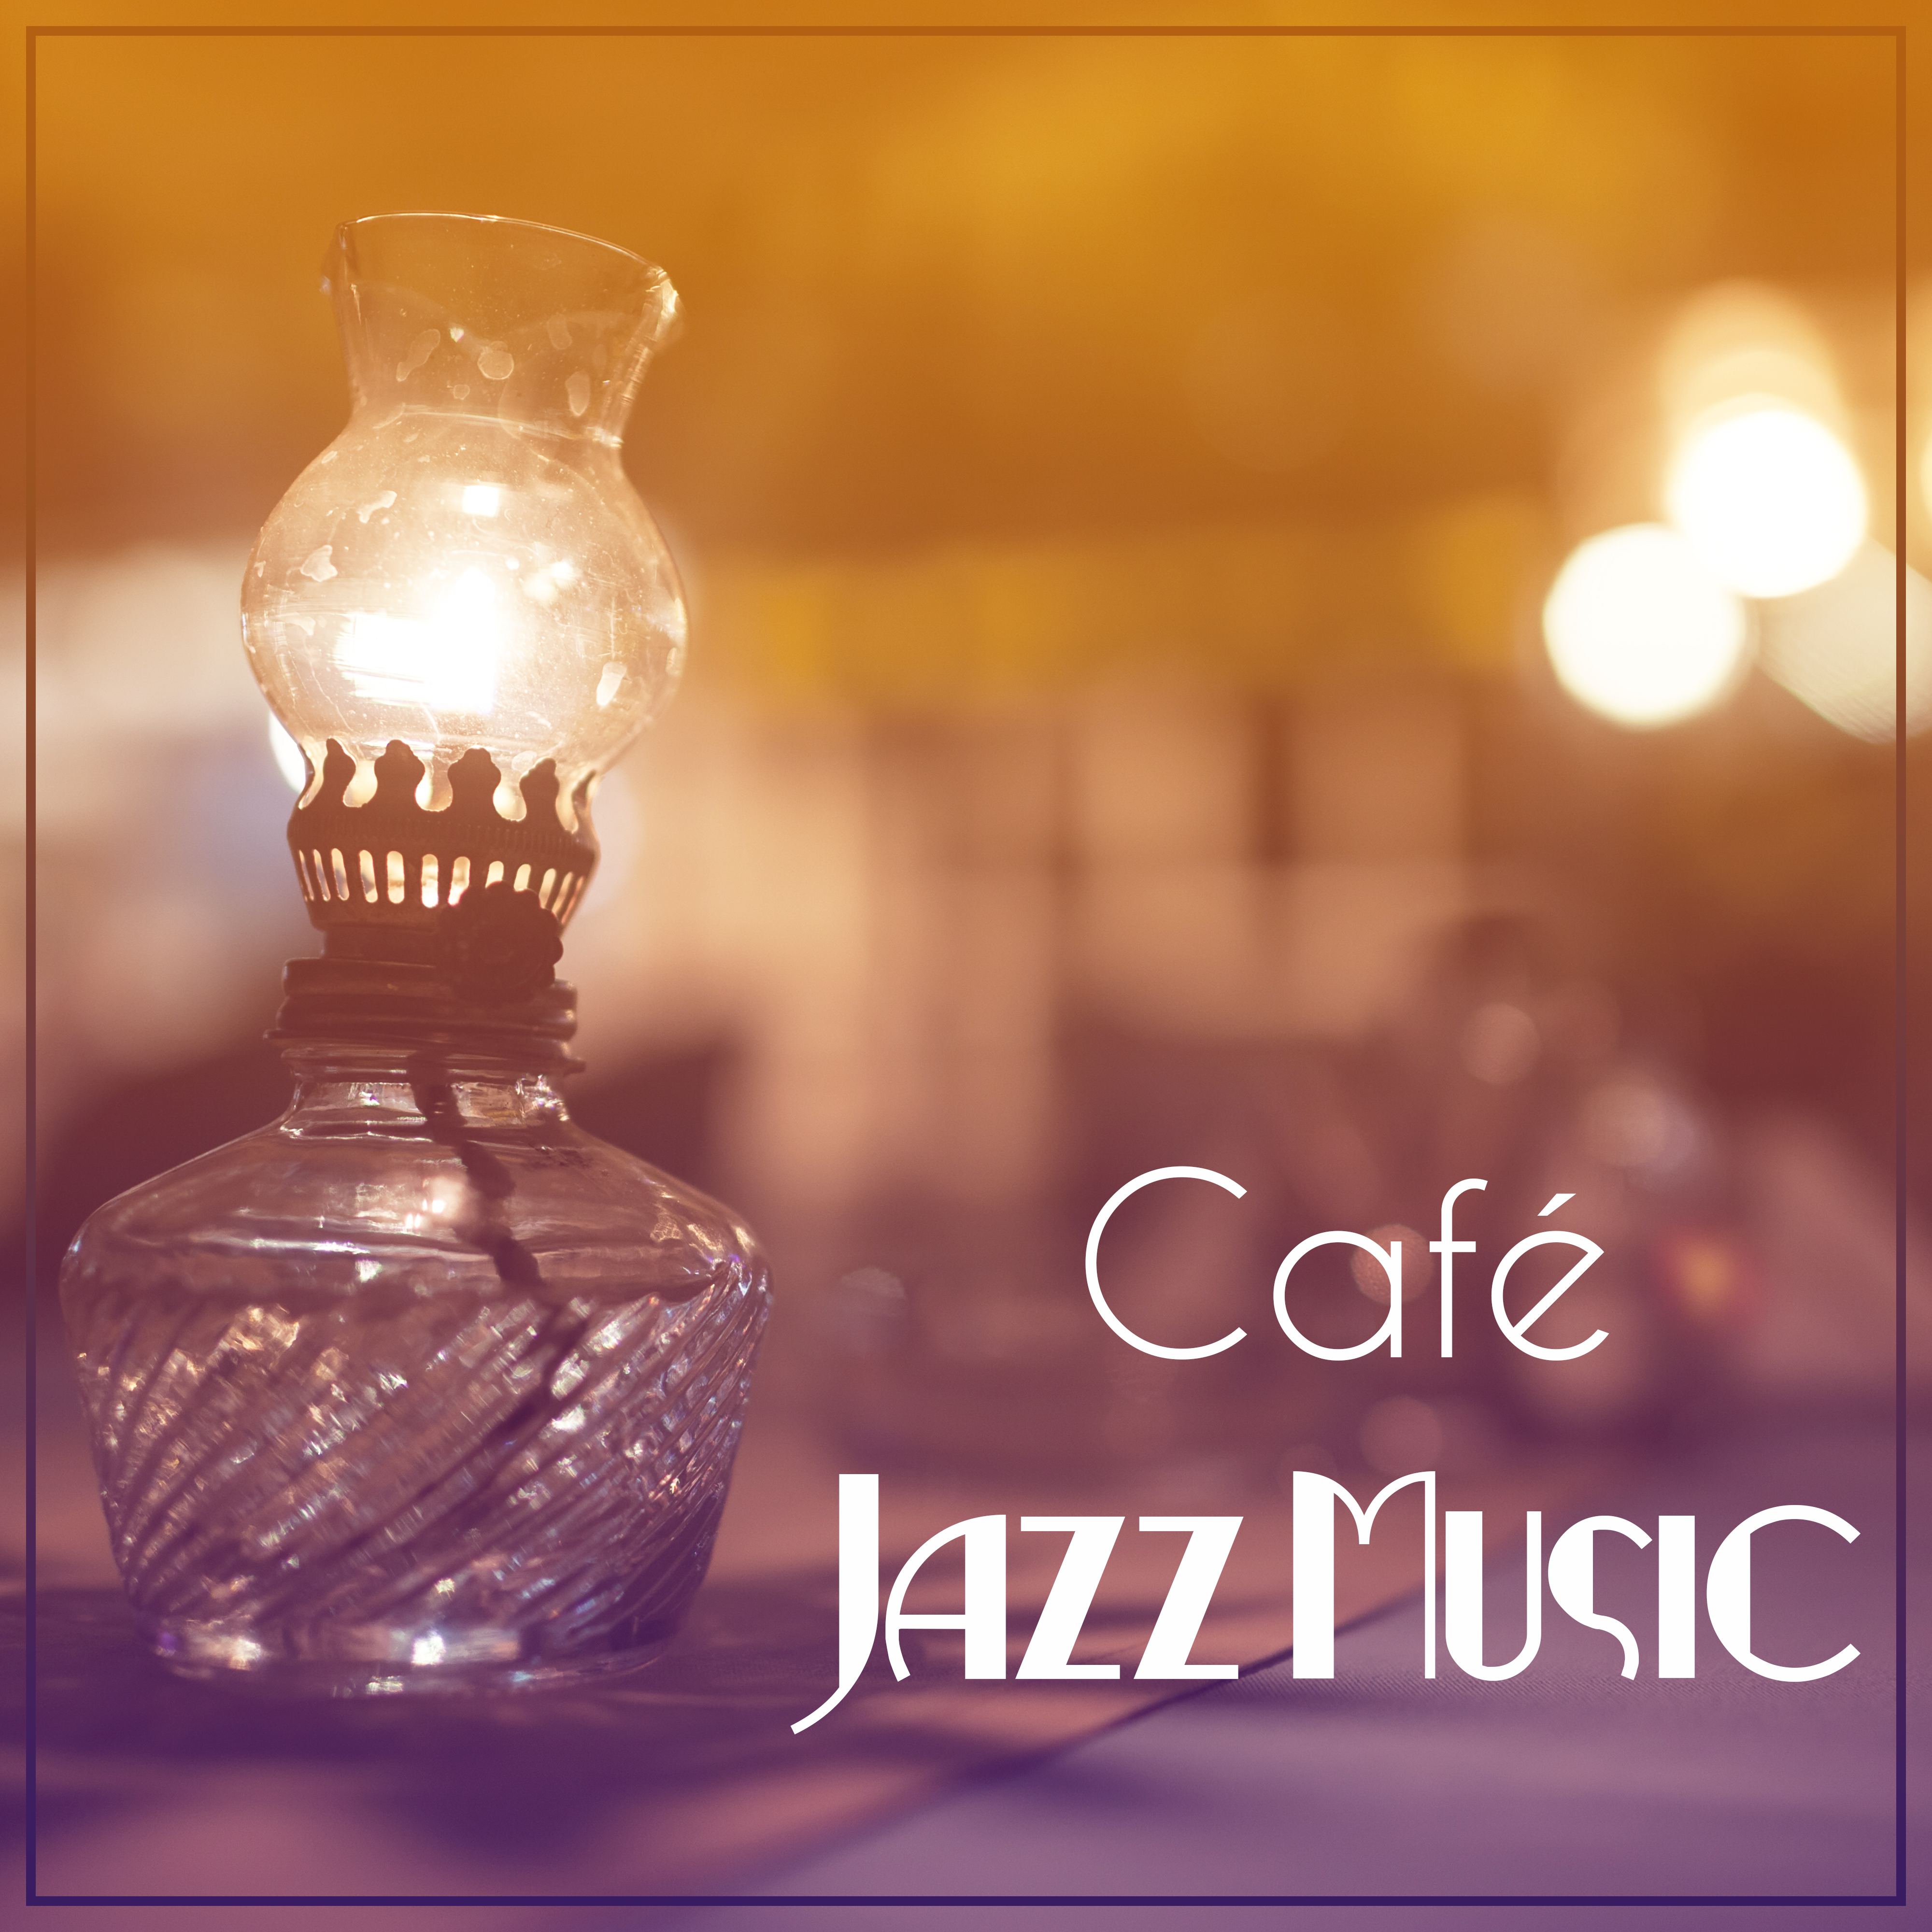 Café Jazz Music – Mellow Jazz, Peaceful Sounds of Guitar and Piano, Best Background for Shopping, Waiting Room & Café